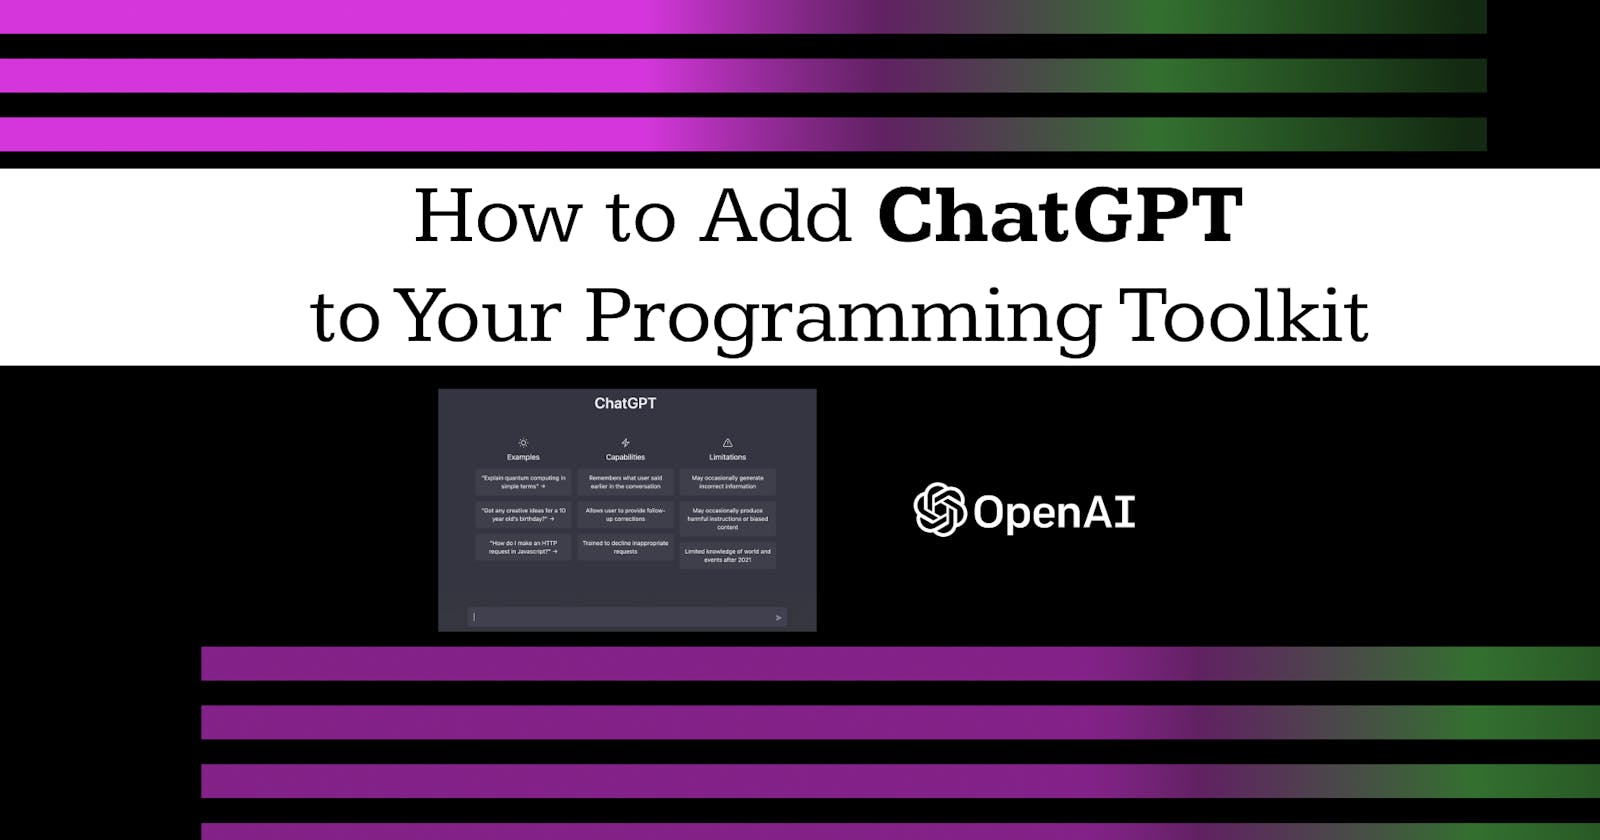 How to Add ChatGPT to Your Programming Toolkit